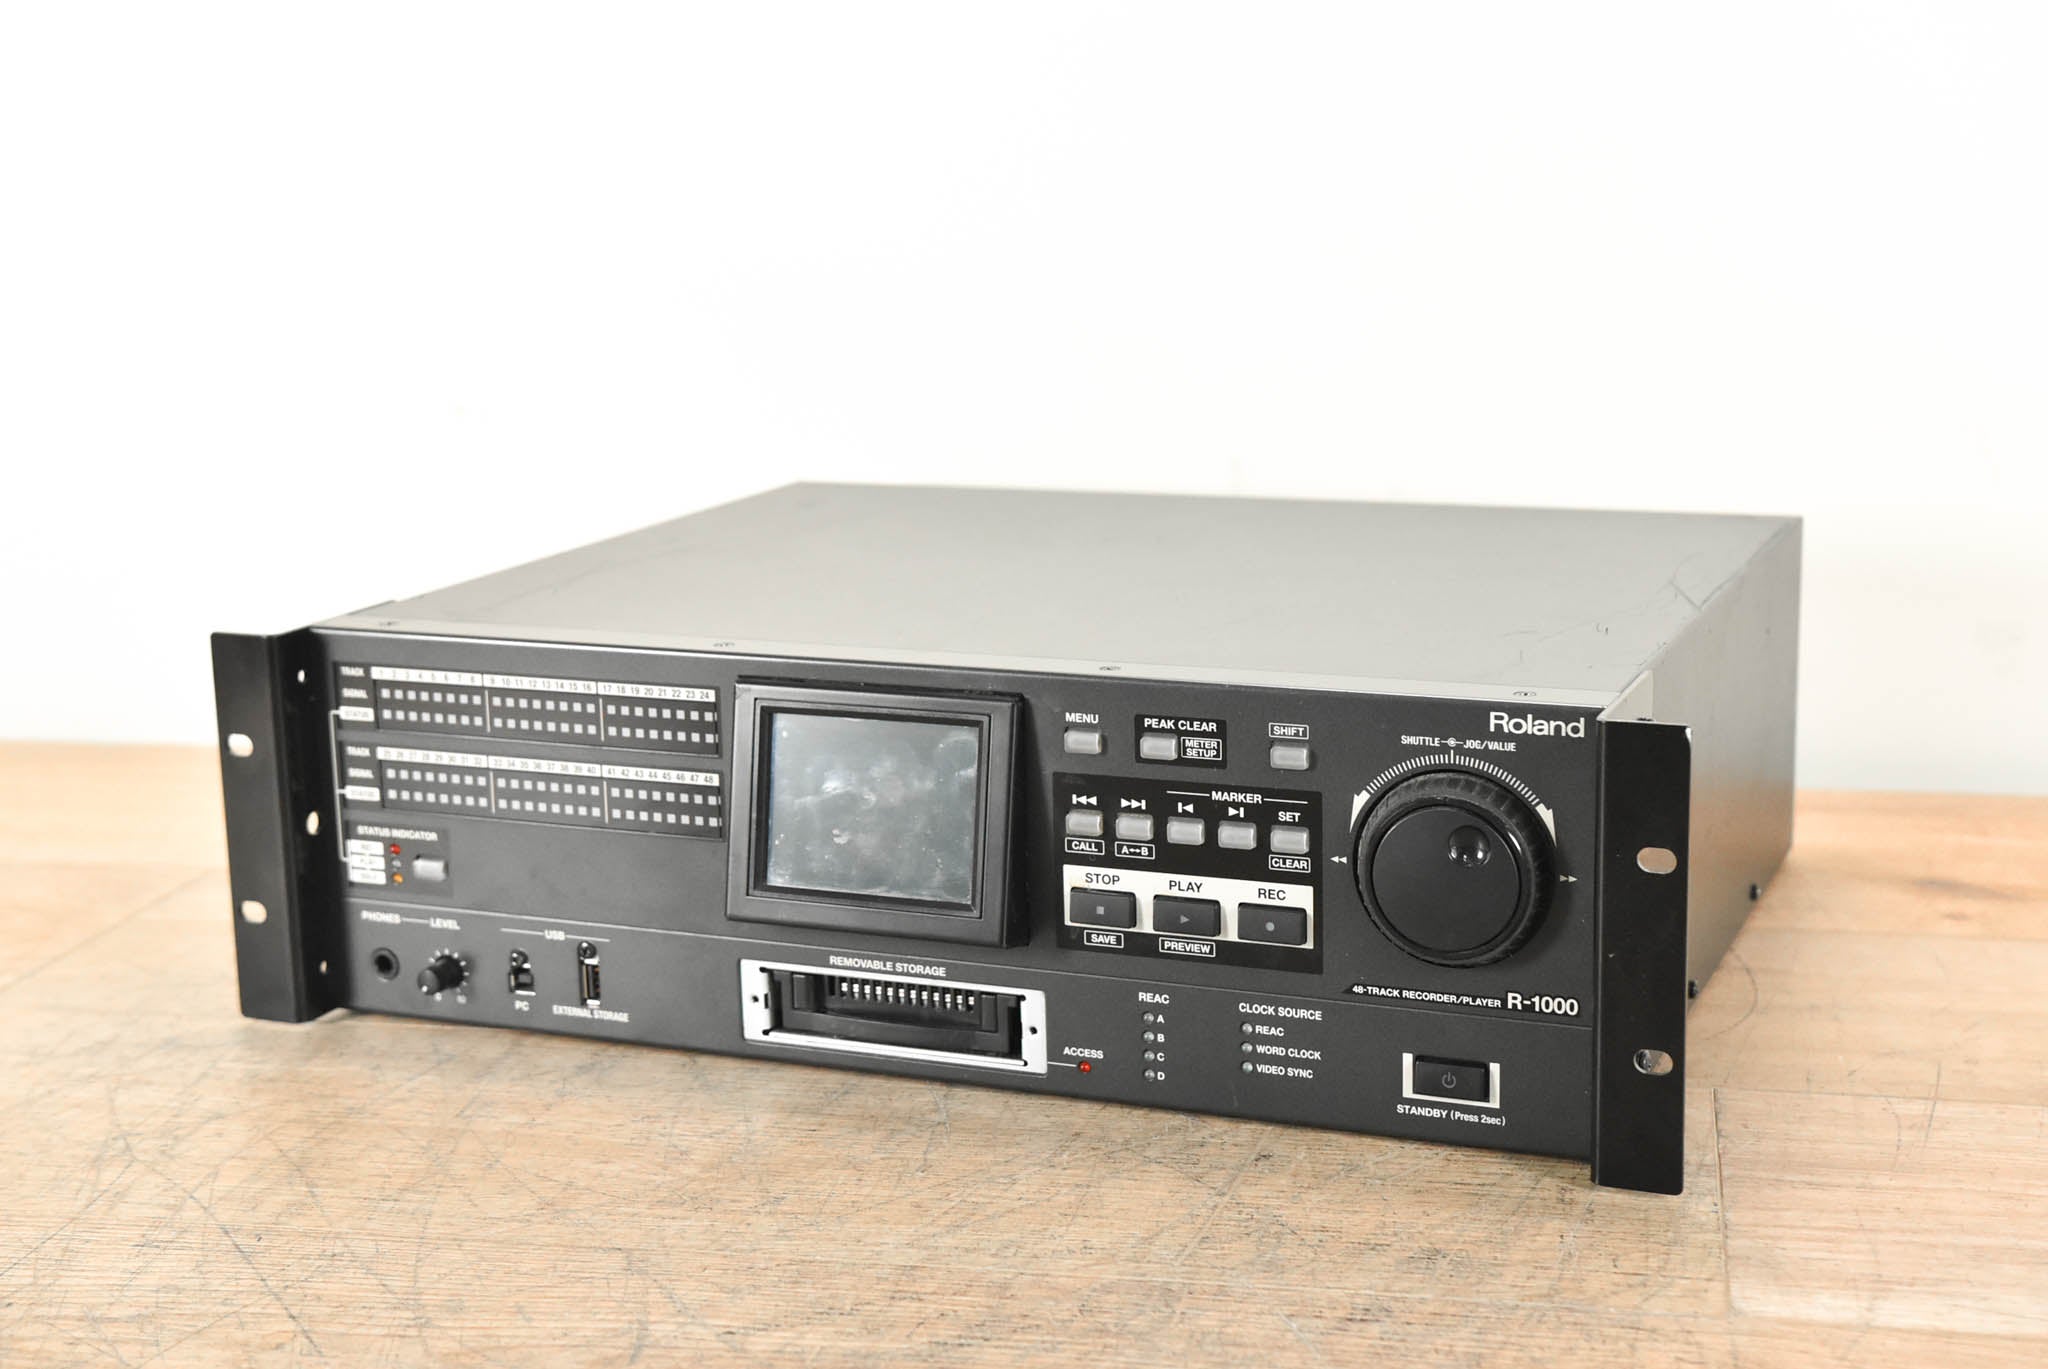 Roland R-1000 48-Track Audio Recorder and Player